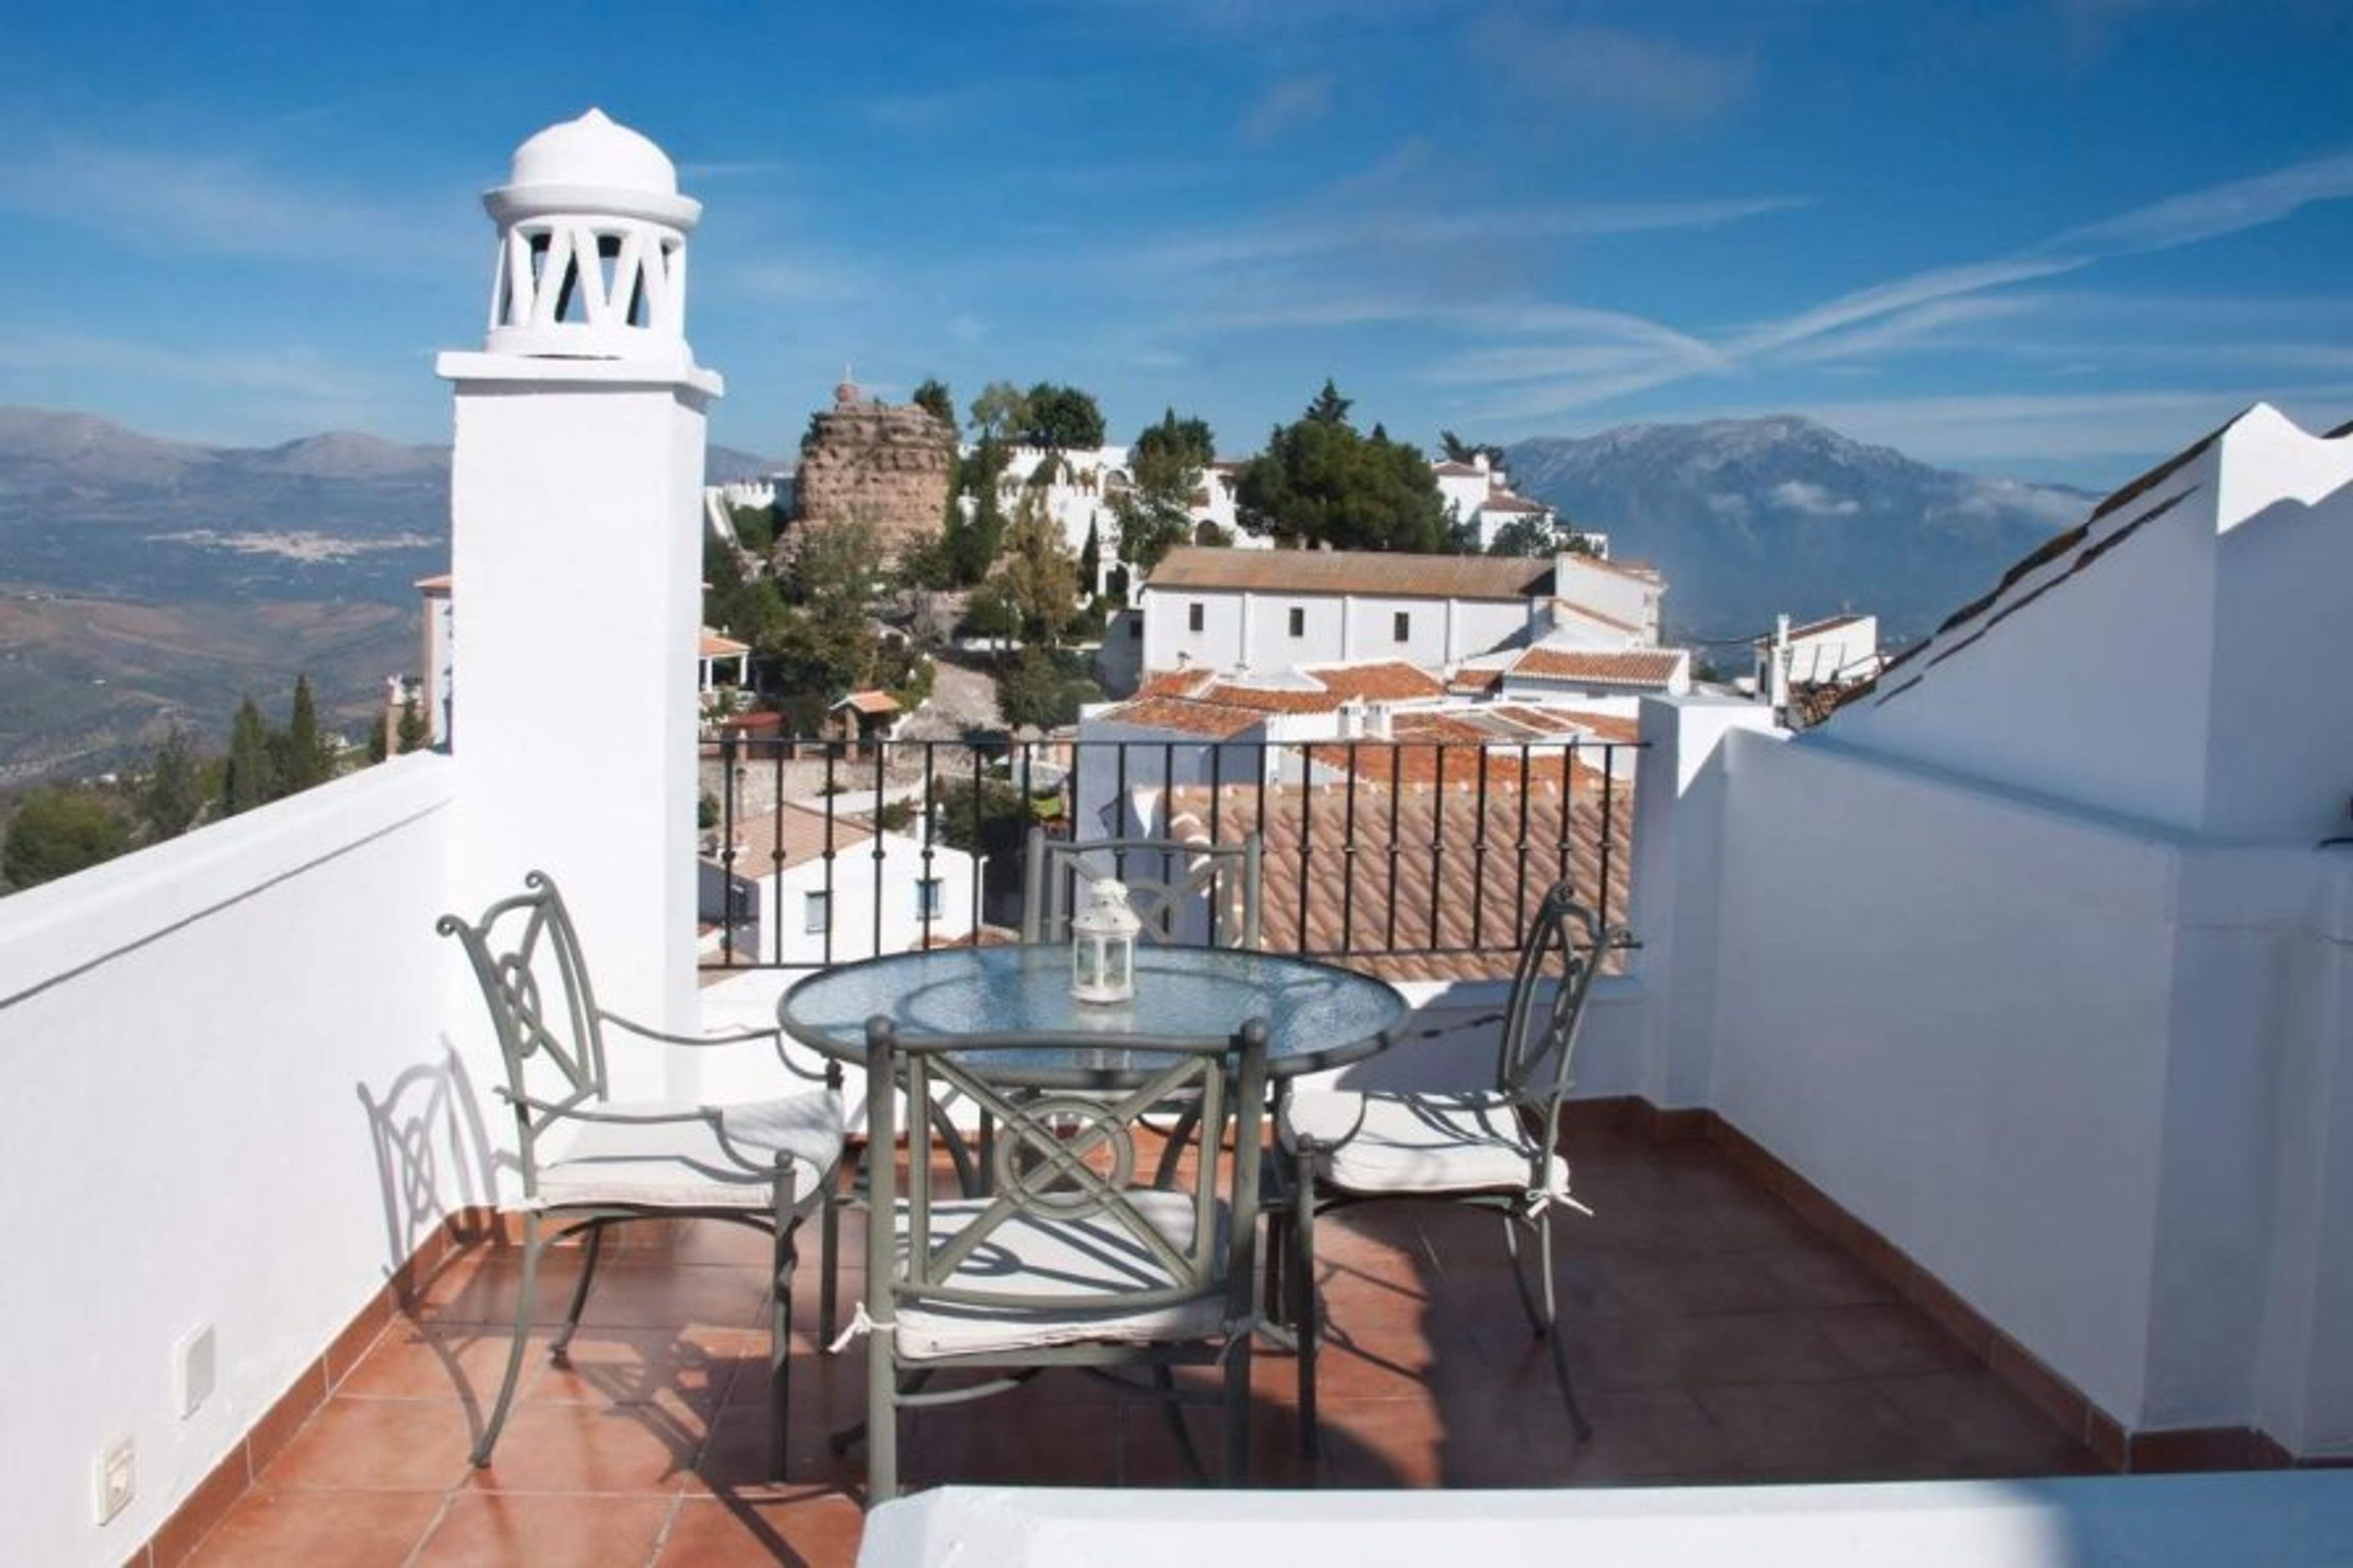 Our terrace has a breathtaking view at the Sierra Tejeda and the Med.